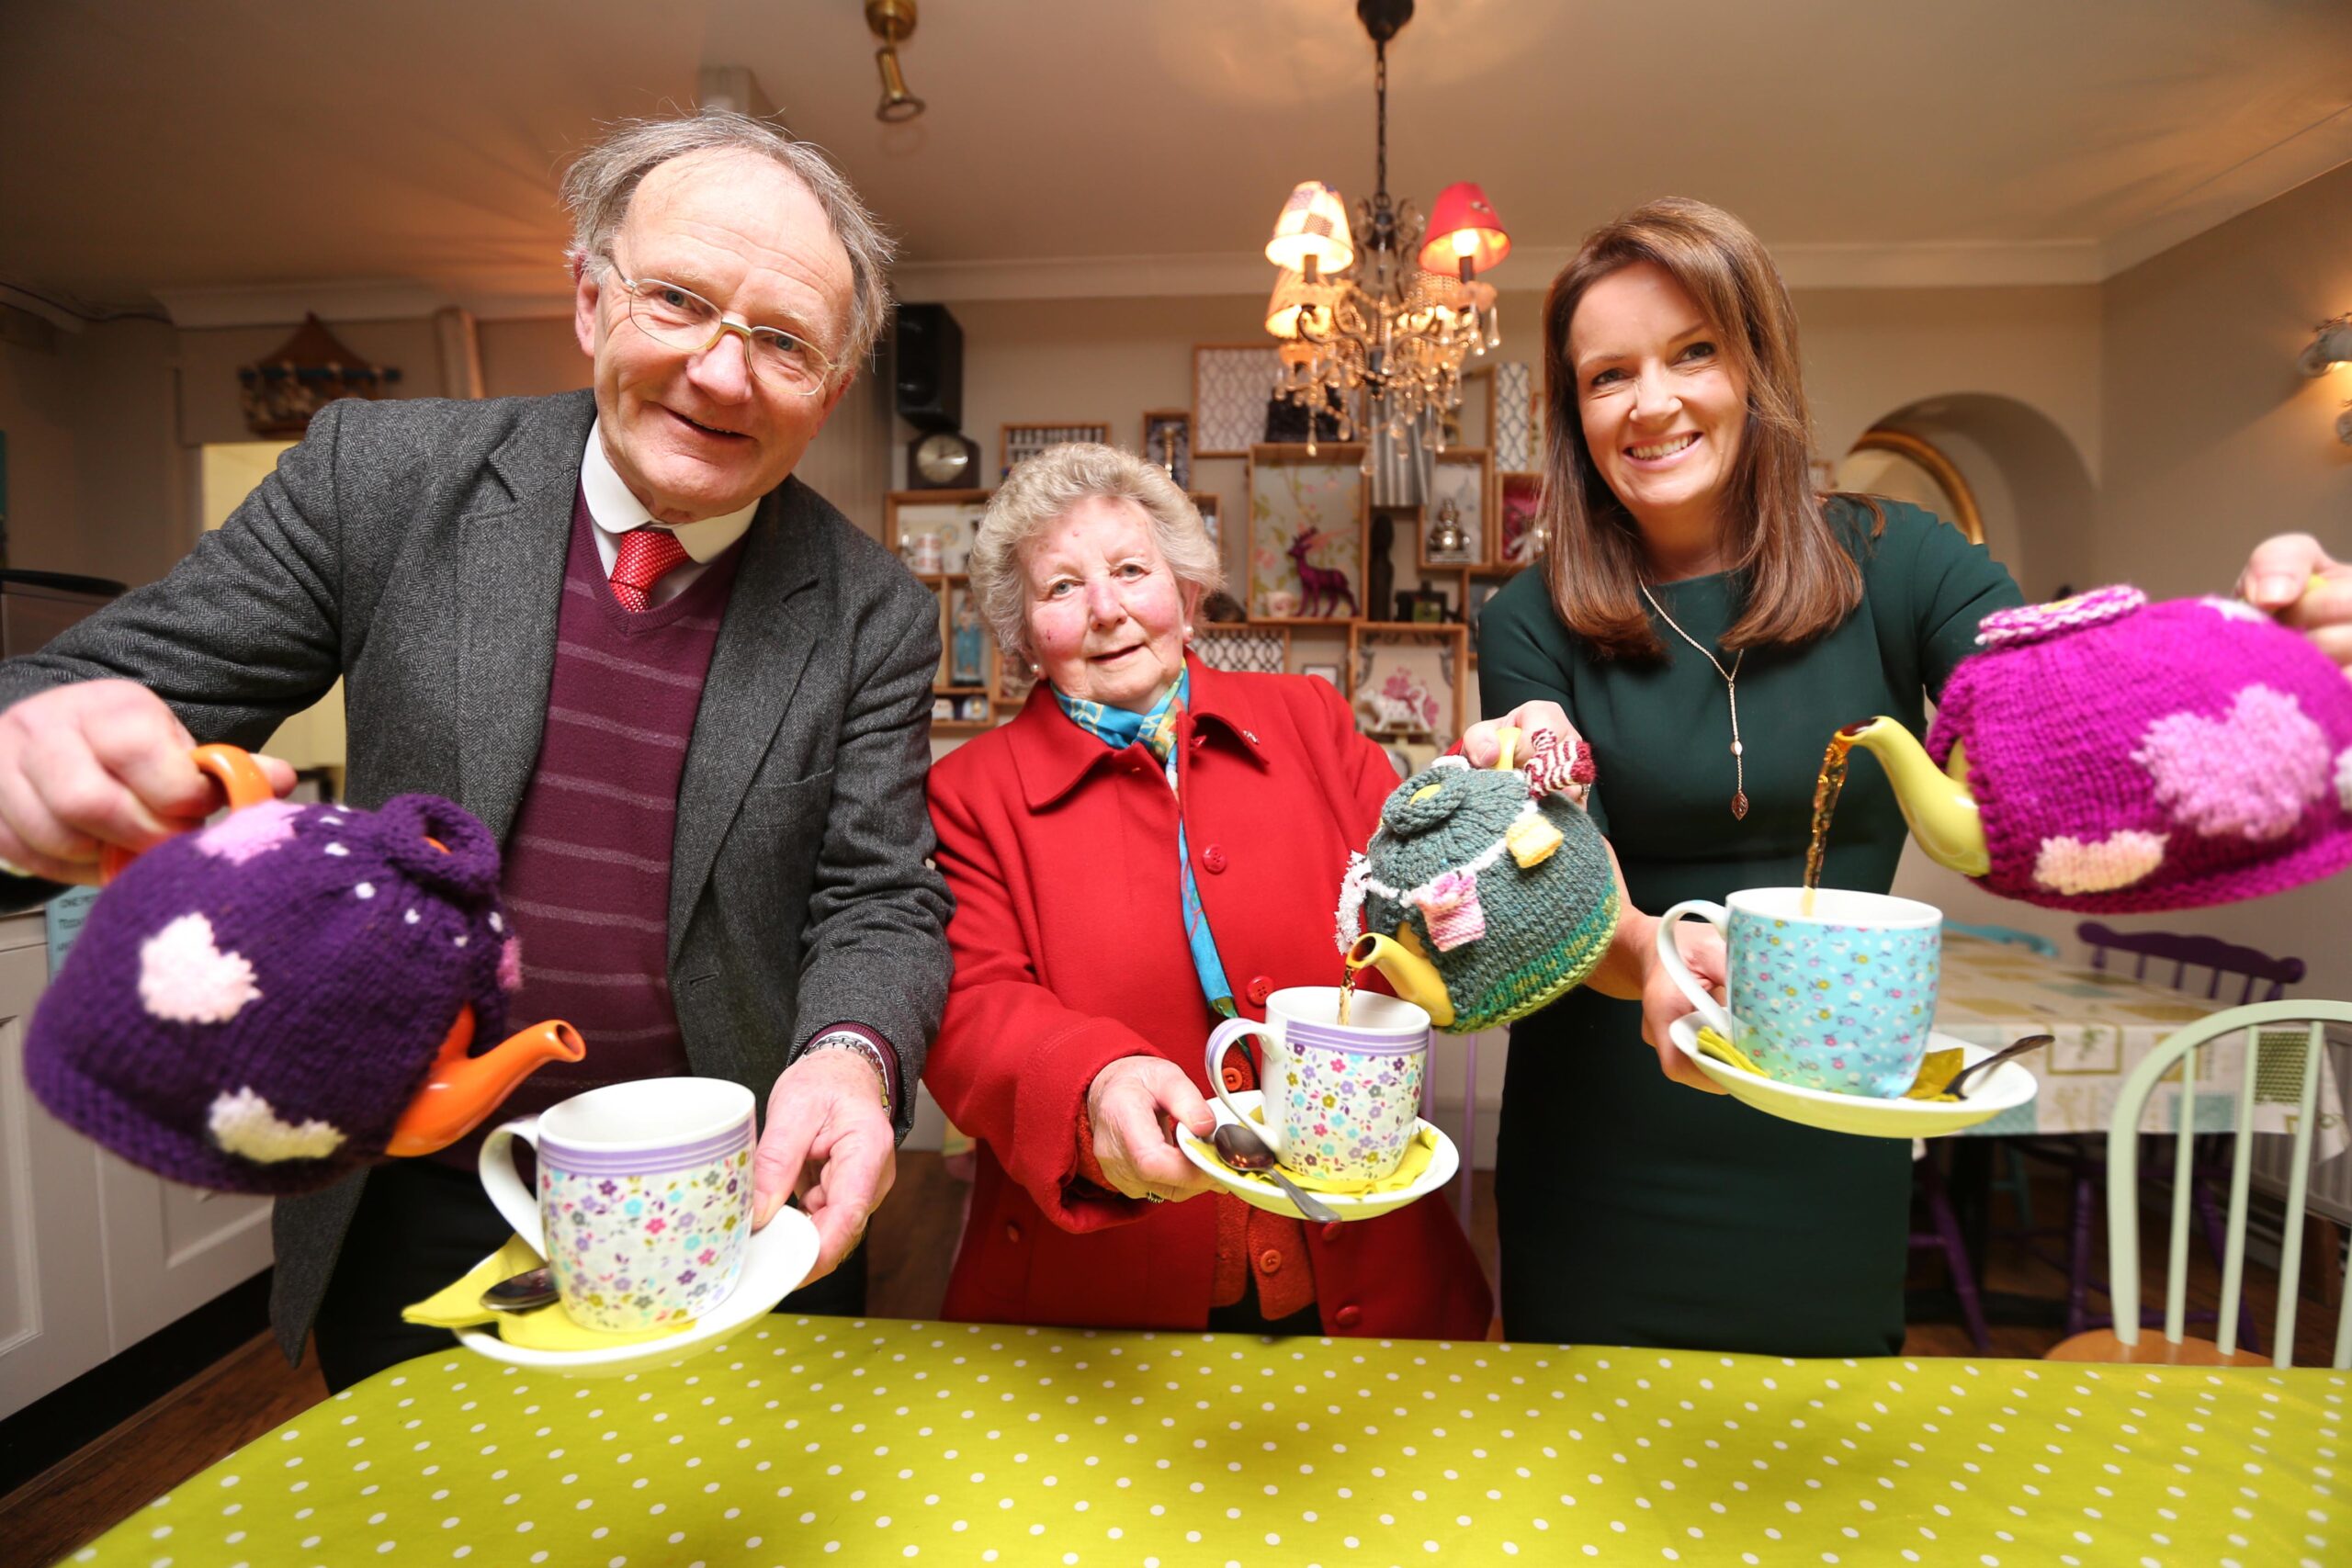 Dr Ciara Kelly launches Alzheimer's Tea Day in the Mellow Fig cafÃ© in Blackrock, Co. Dublin with Richard Dolan, member of the Irish Dementia Carers Campaign Network and Evelyn Swan, Volunteer with The Alzheimer Society of Ireland.